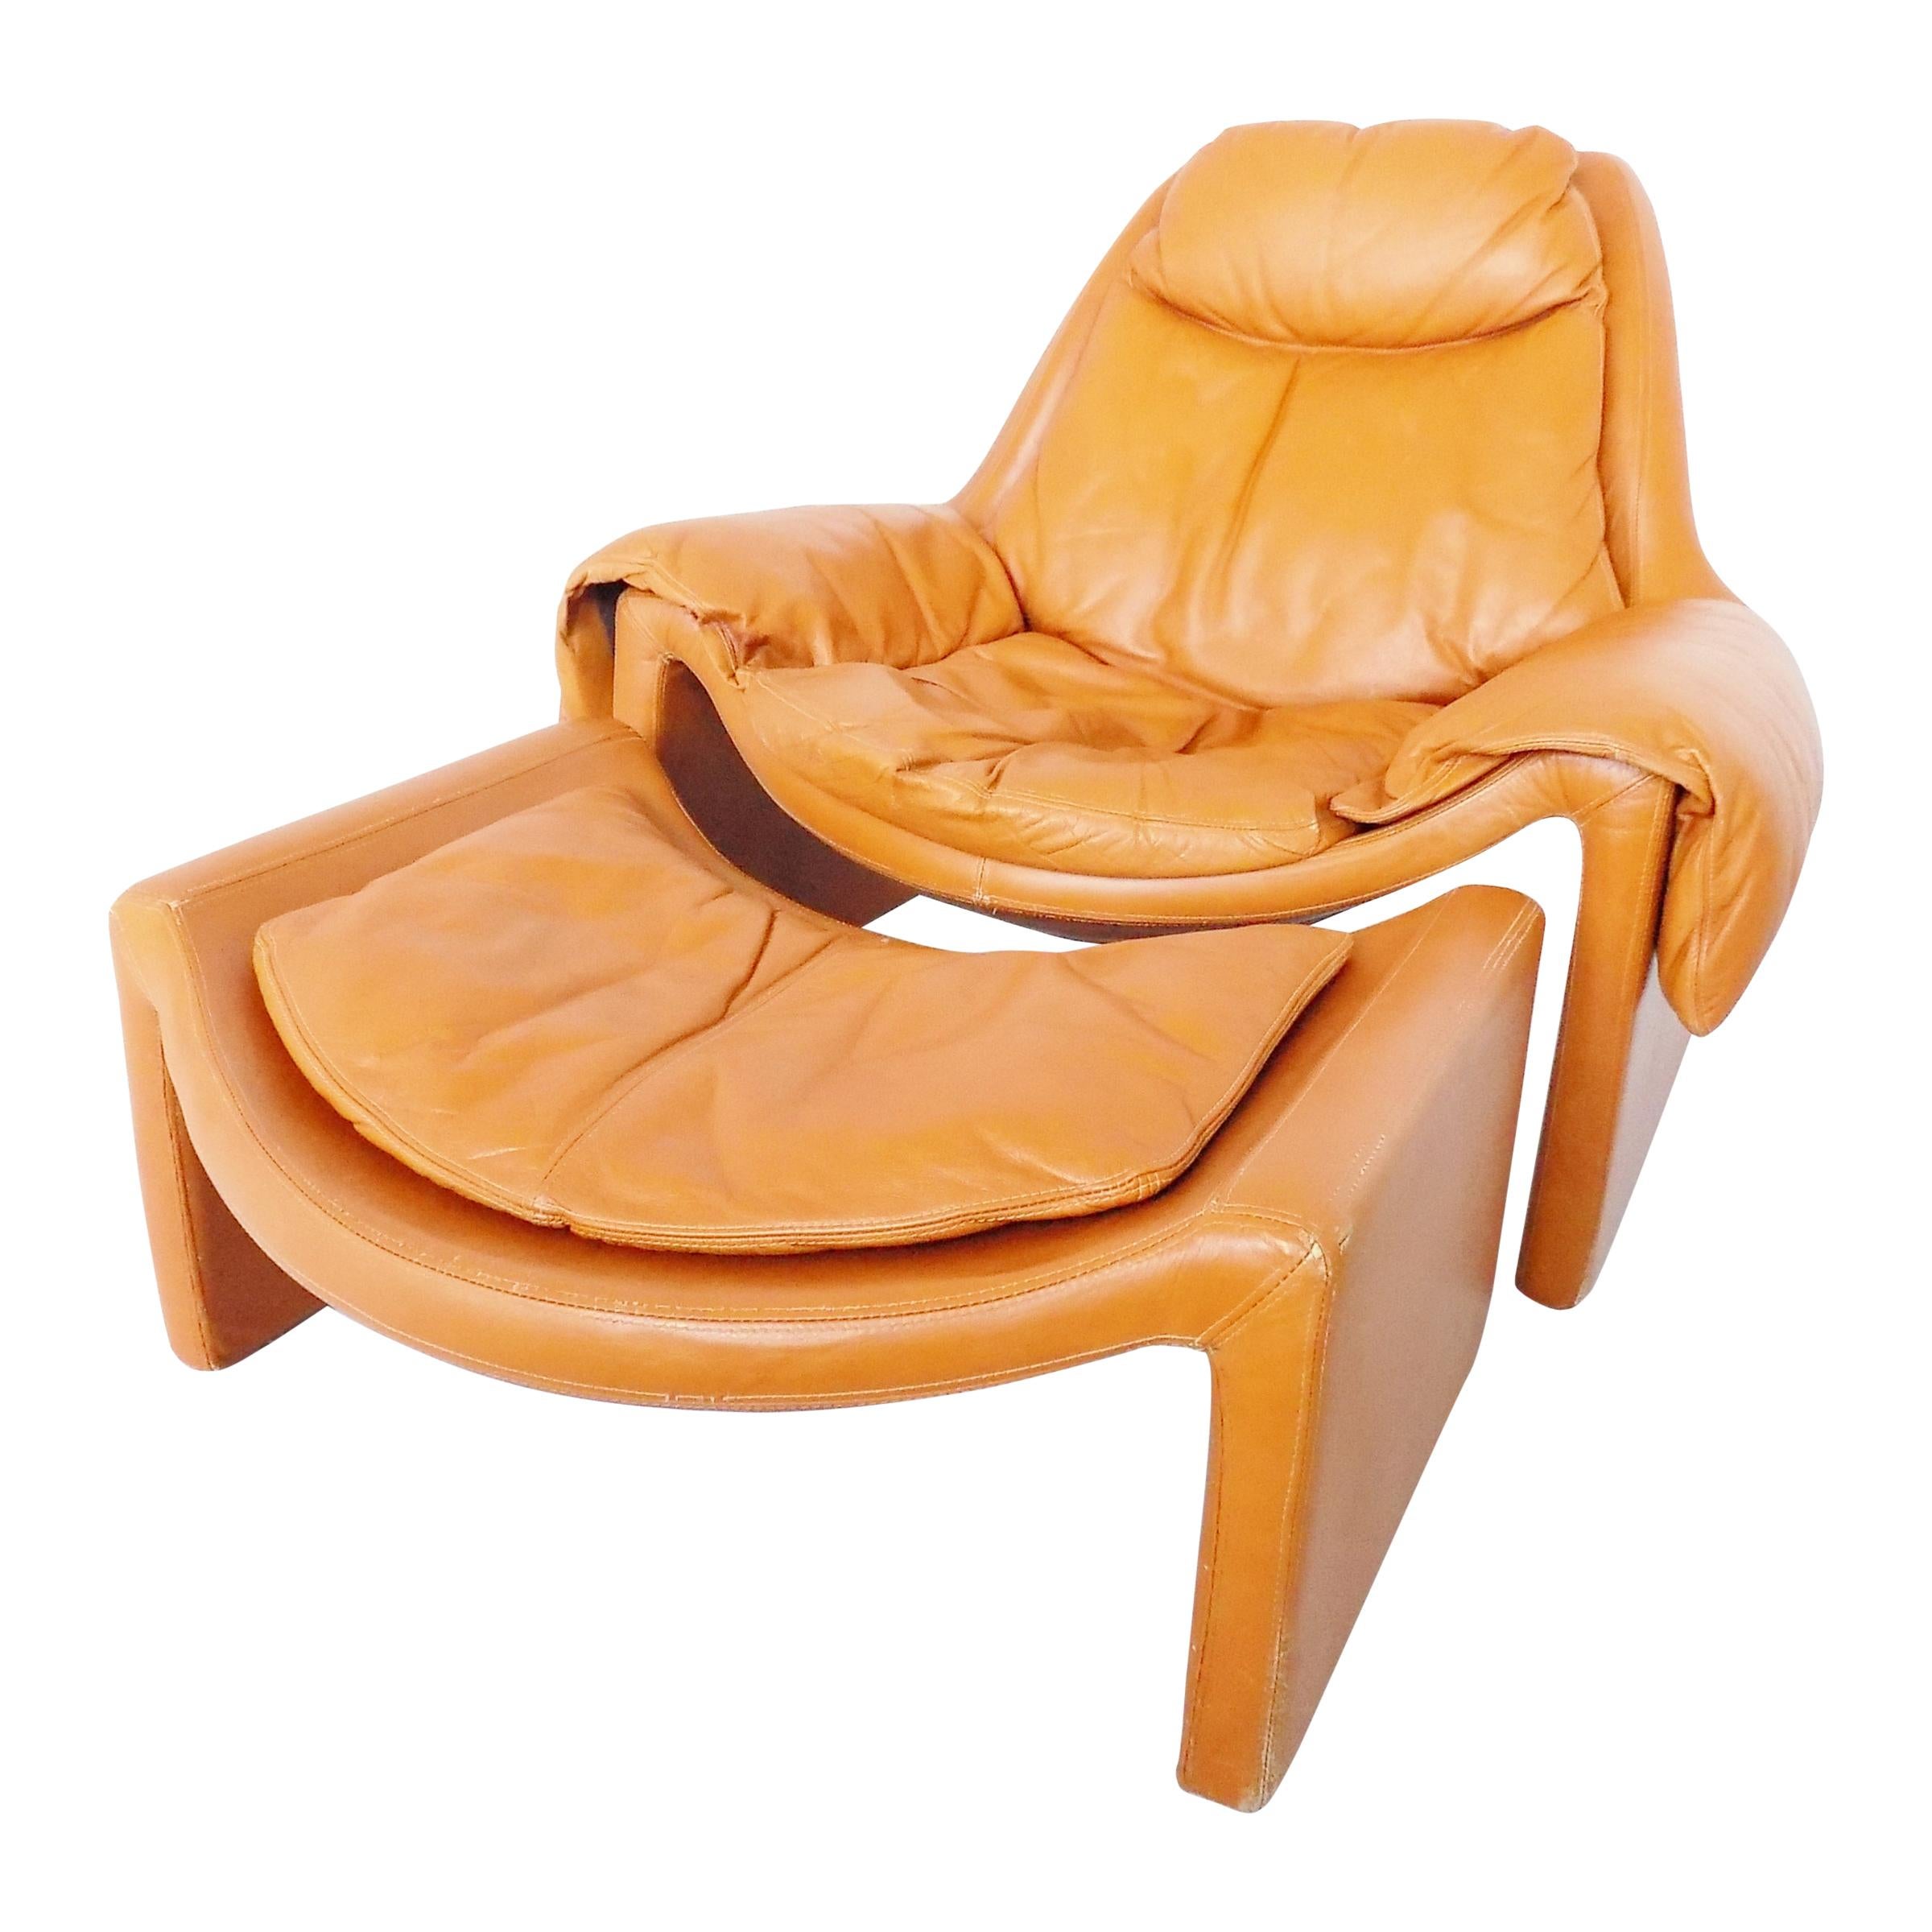 Saporiti P60 Leather Lounge Chair with Ottoman by Vittorio Introini, Midcentury